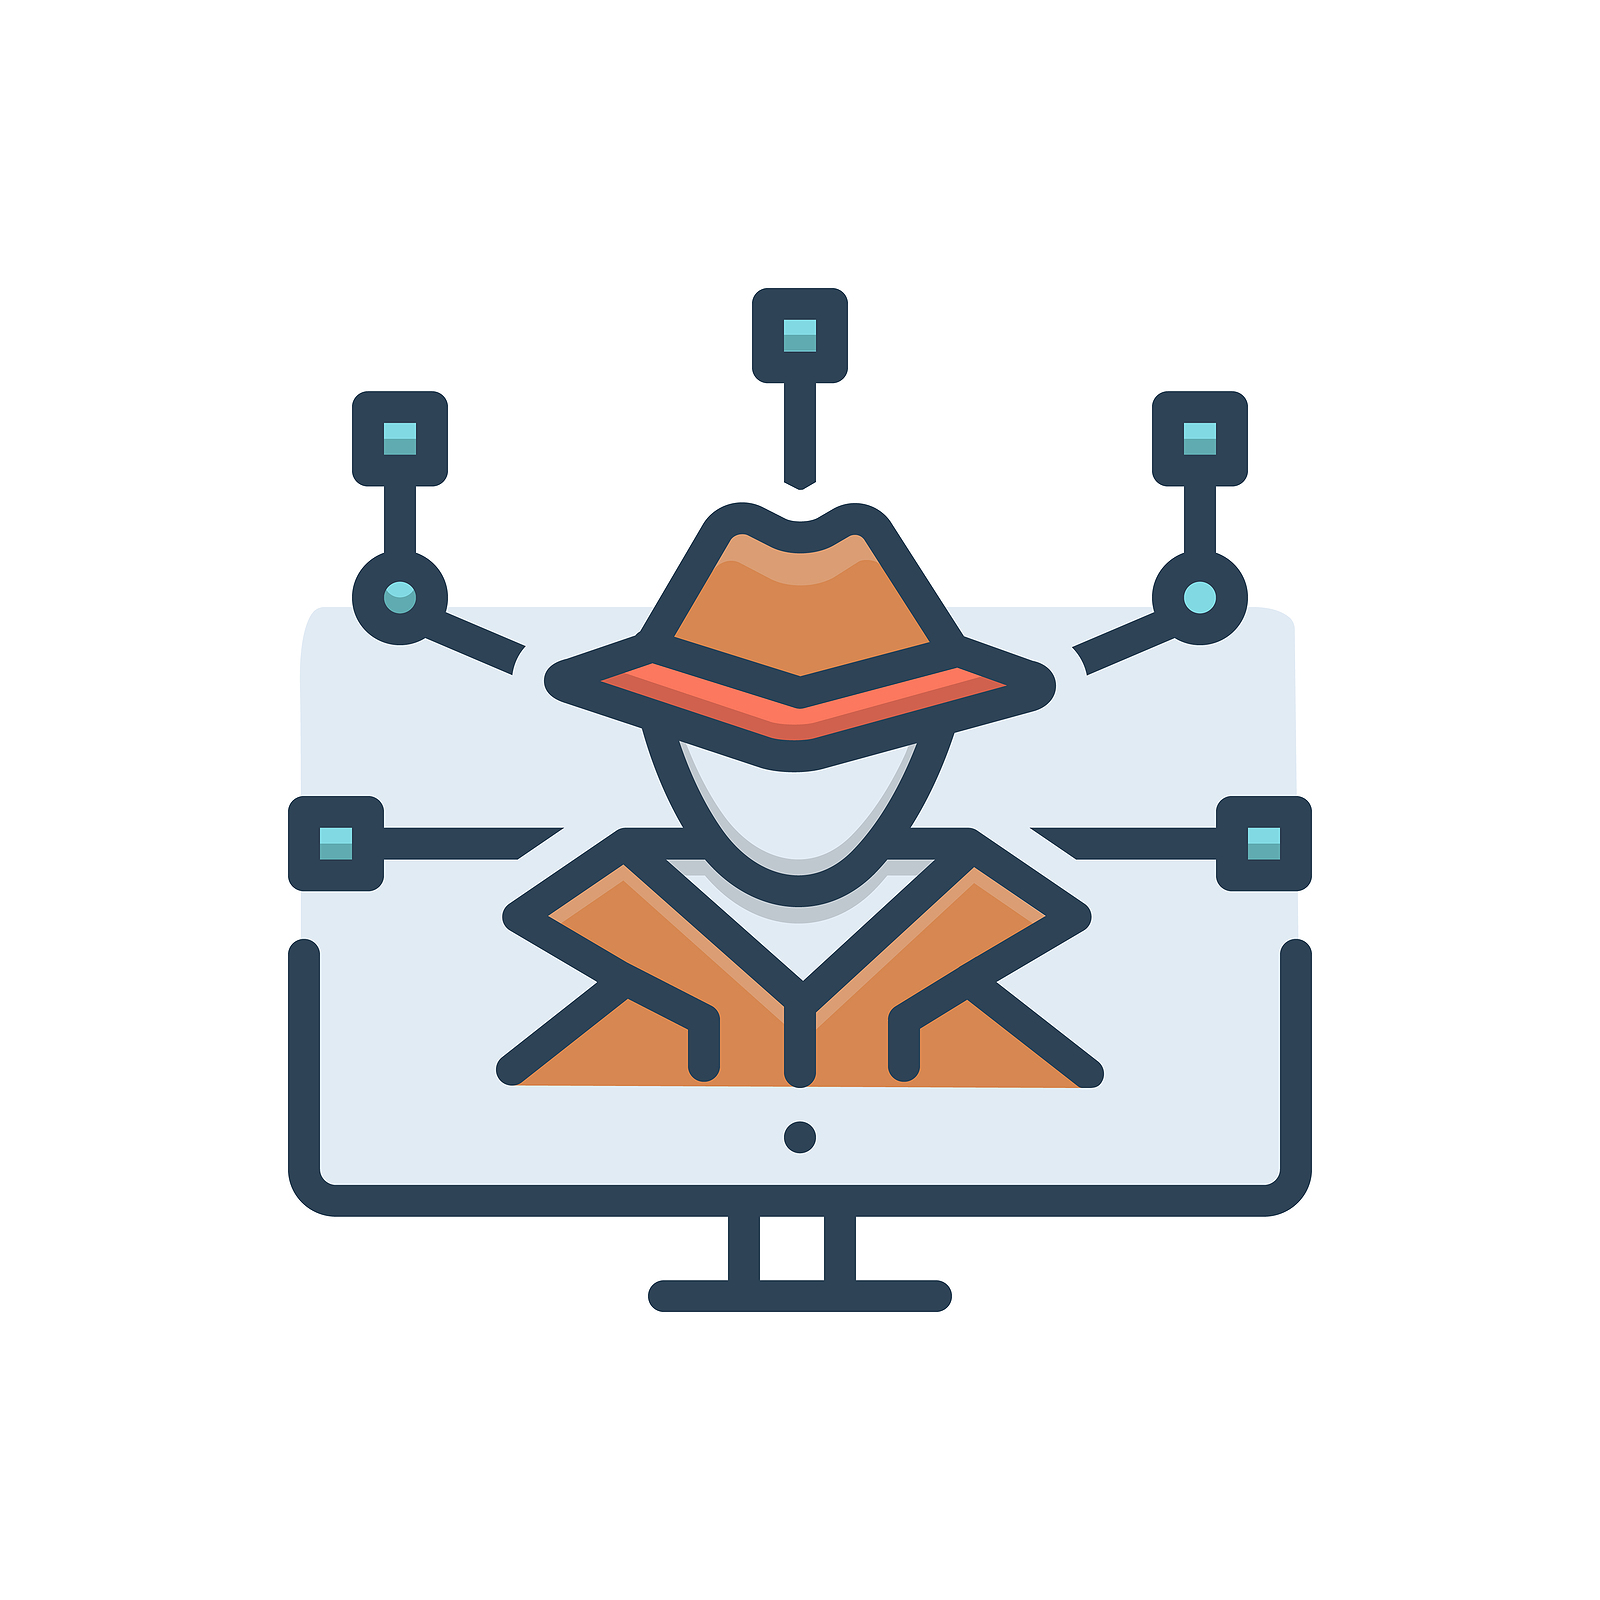 Color illustration icon for cyber-crime cyber crime hackers